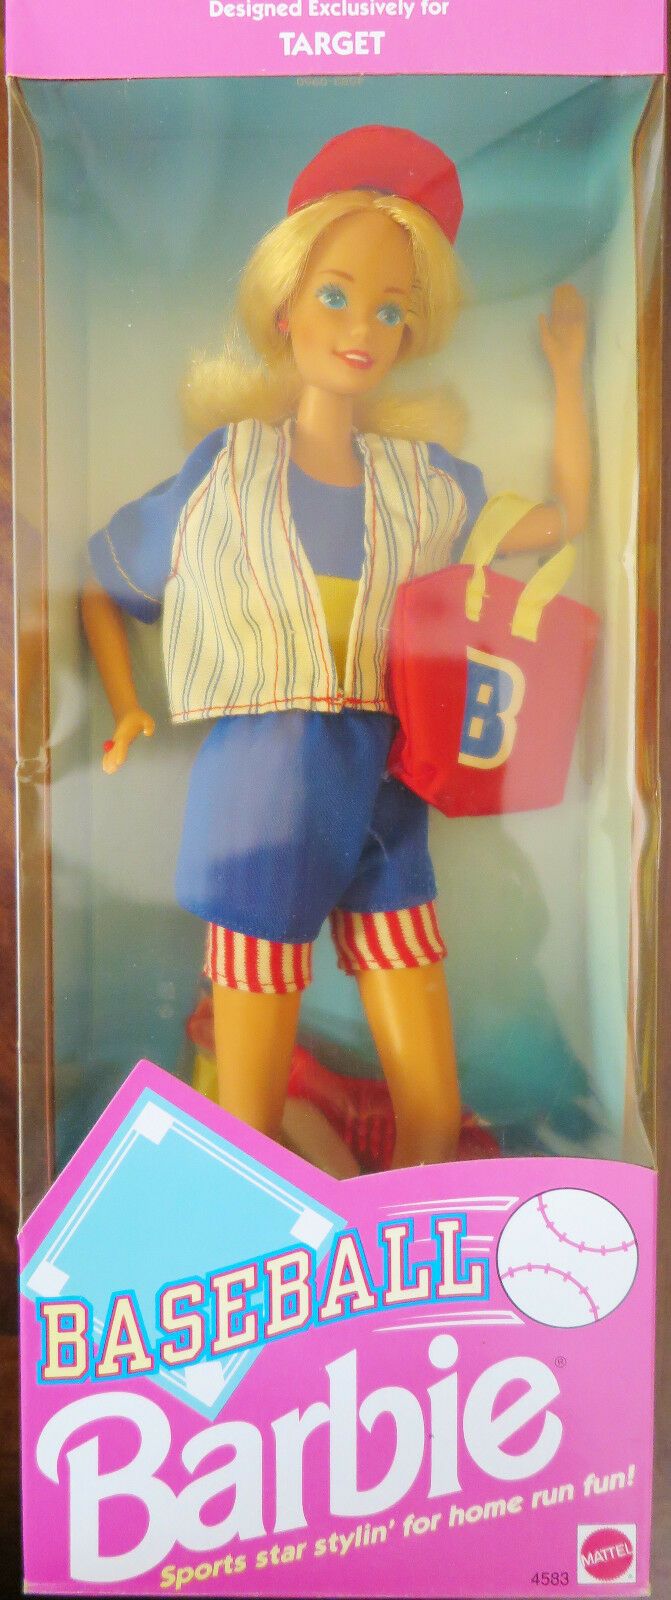 New Barbie Baseball Doll Designed Exclusively for Target No.4583 NRFB 1992